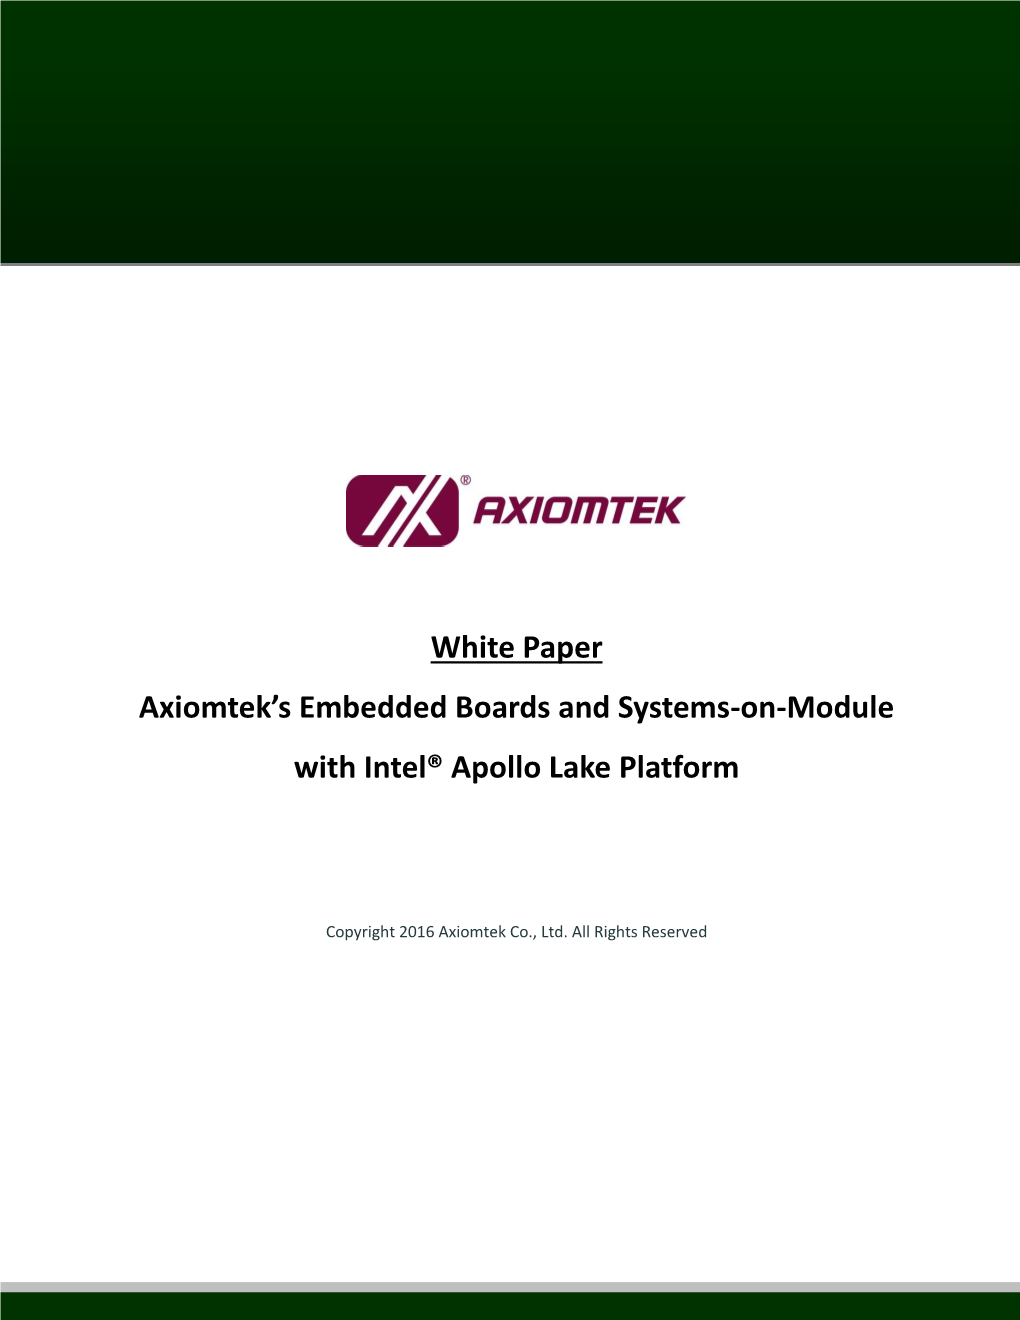 White Paper Axiomtek's Embedded Boards and Systems-On-Module